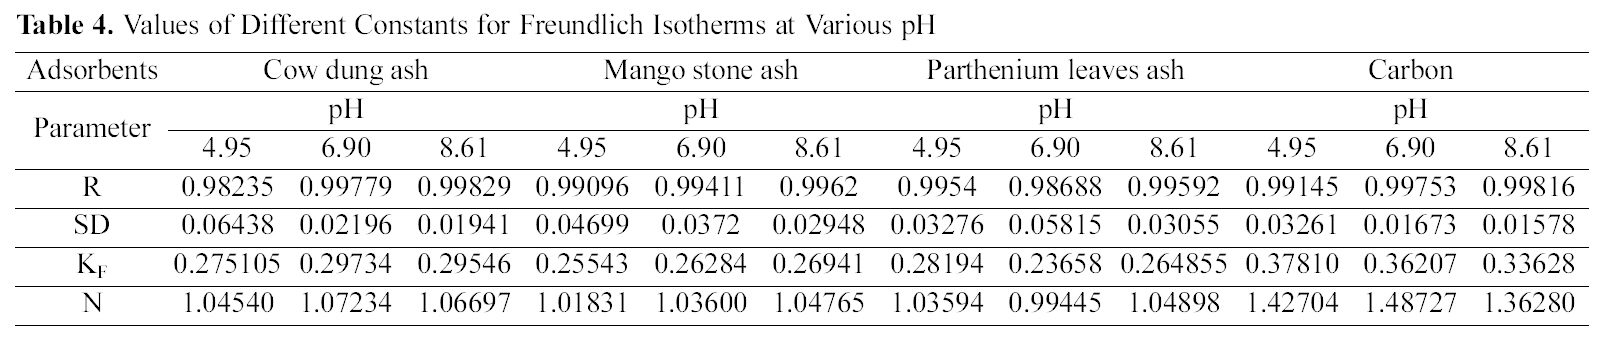 Values of Different Constants for Freundlich Isotherms at Various pH